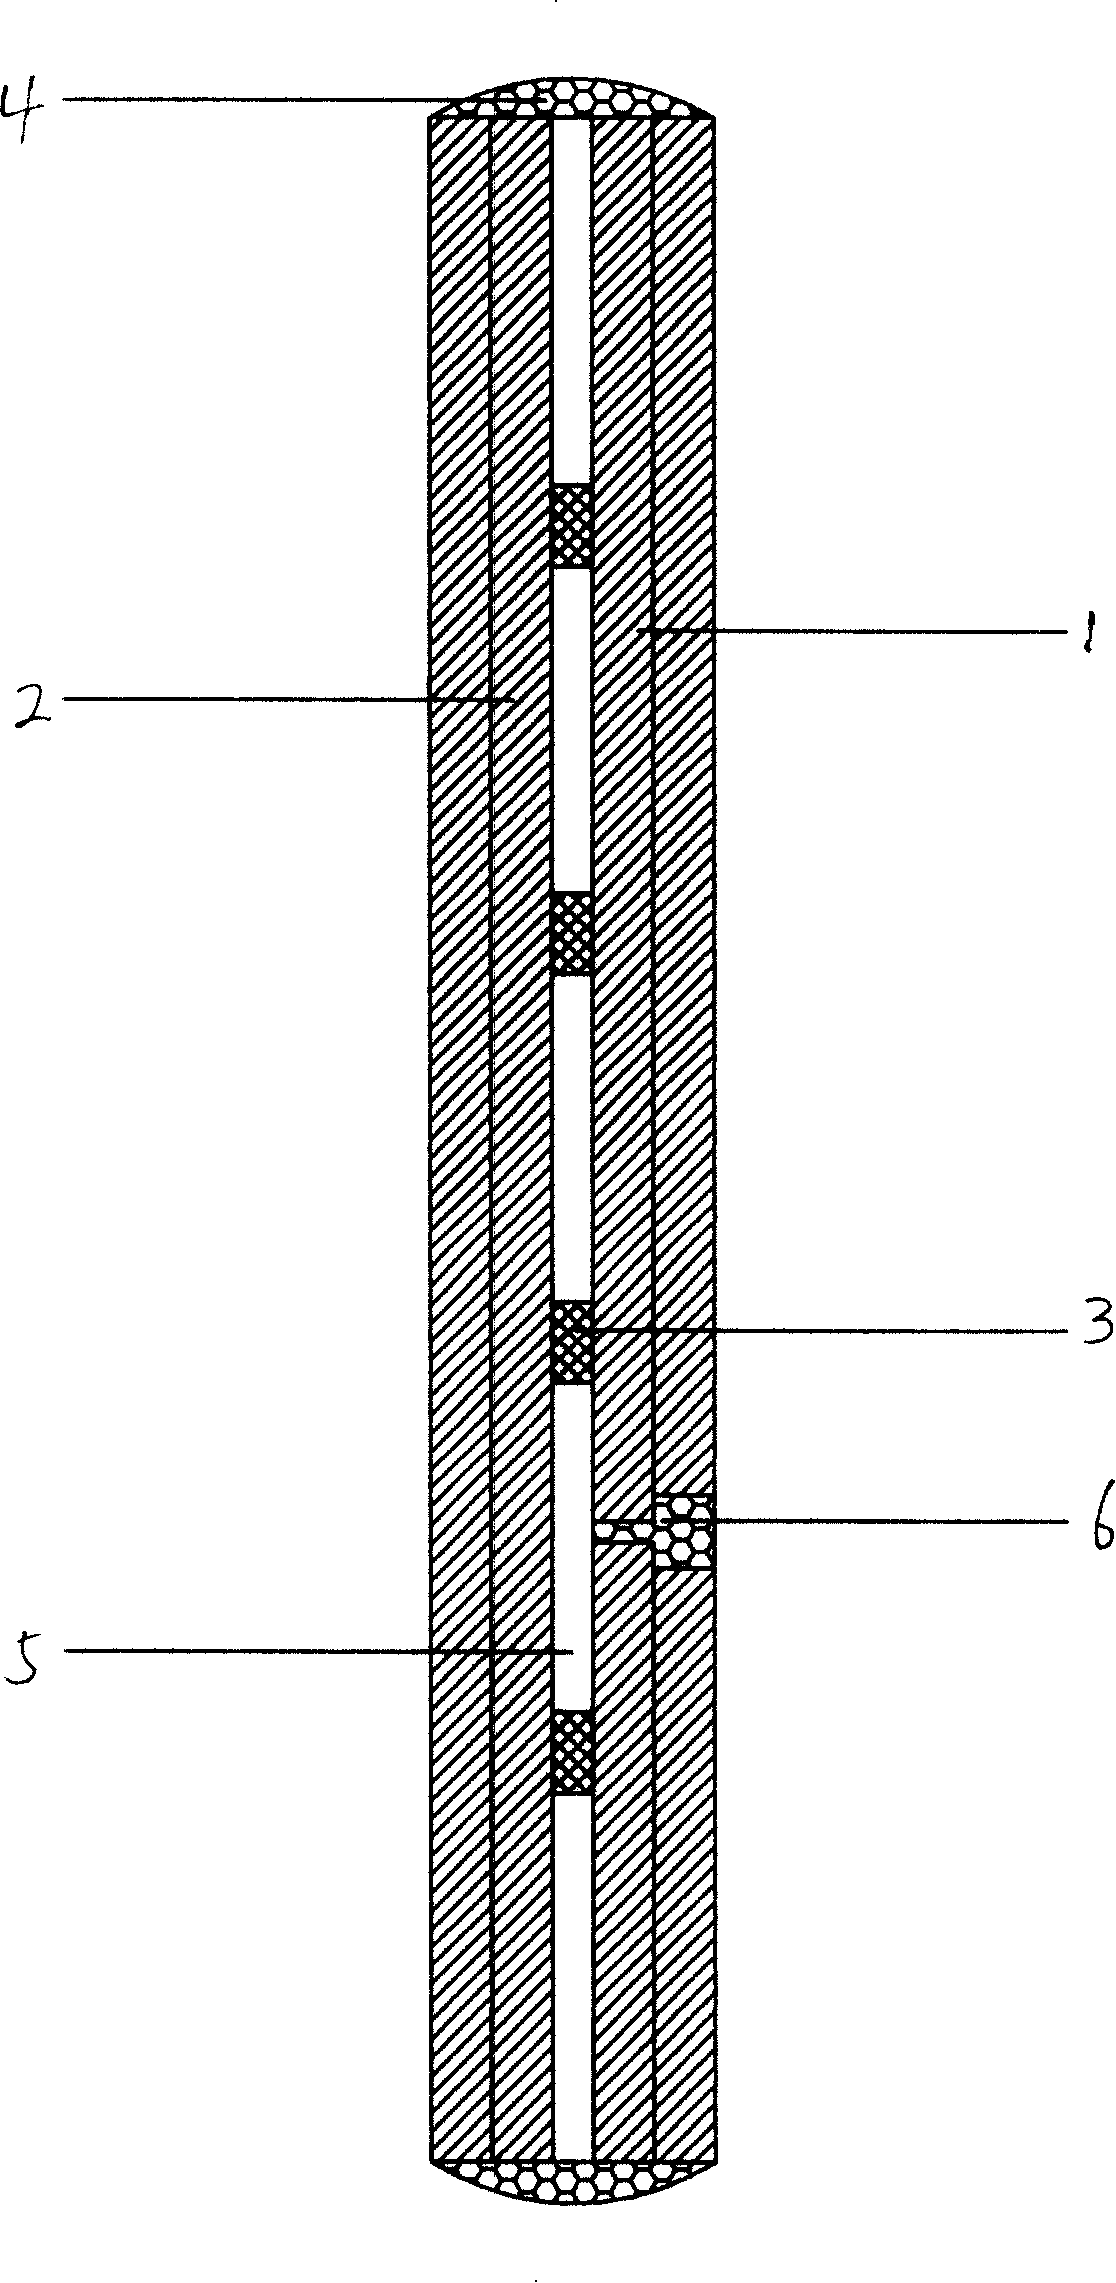 Laminated vacuum glass having high safety performance and manufacturing method thereof